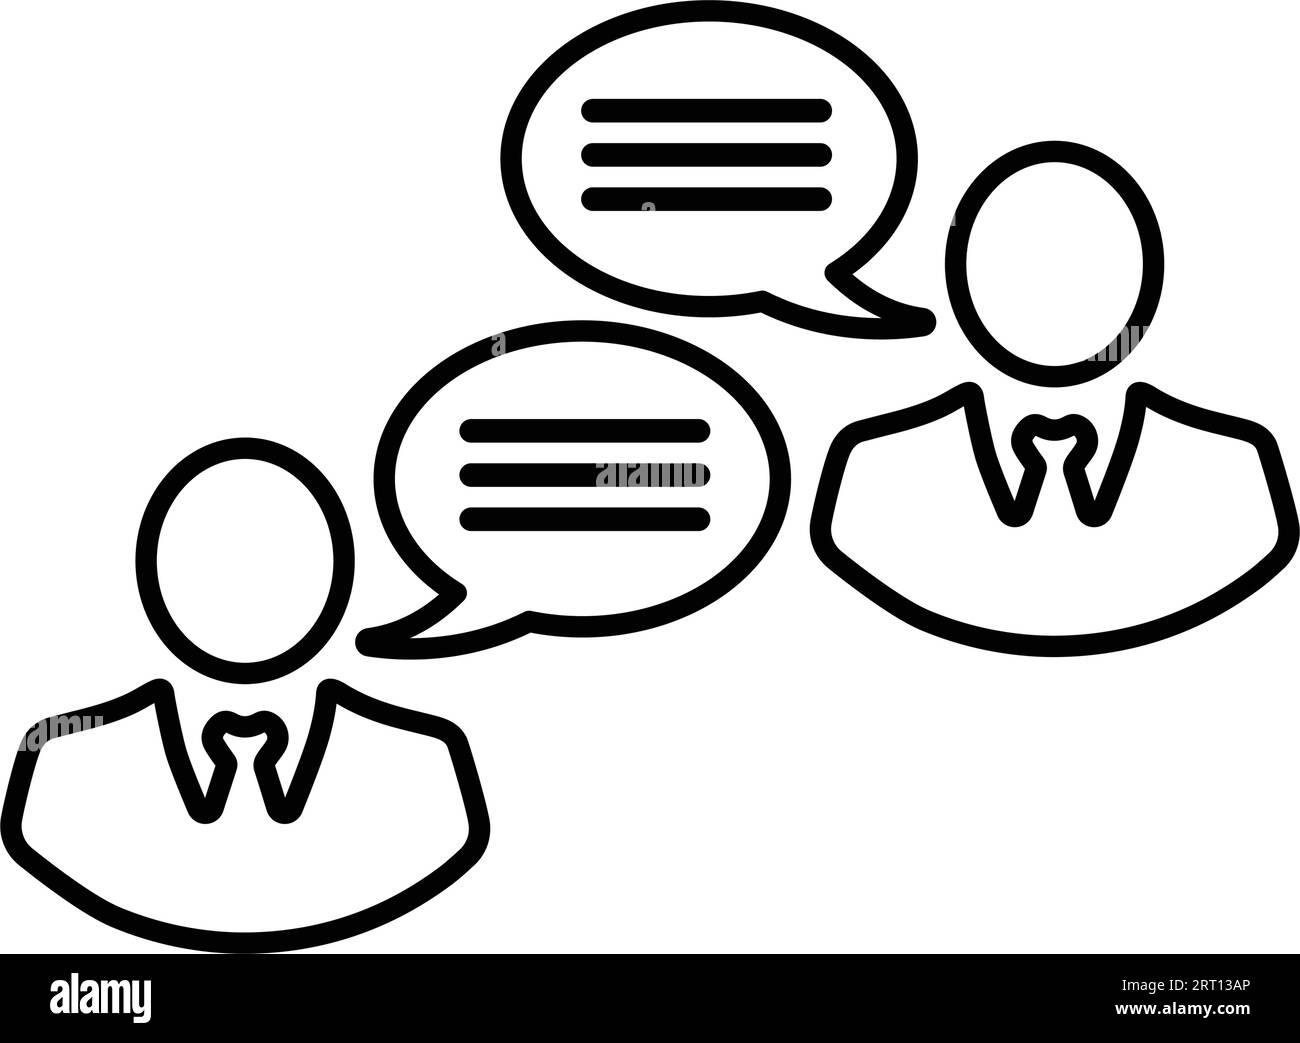 Professional Chat icon. Use for designing and developing websites, commercial purposes, print media, web or any type of design task. Stock Vector